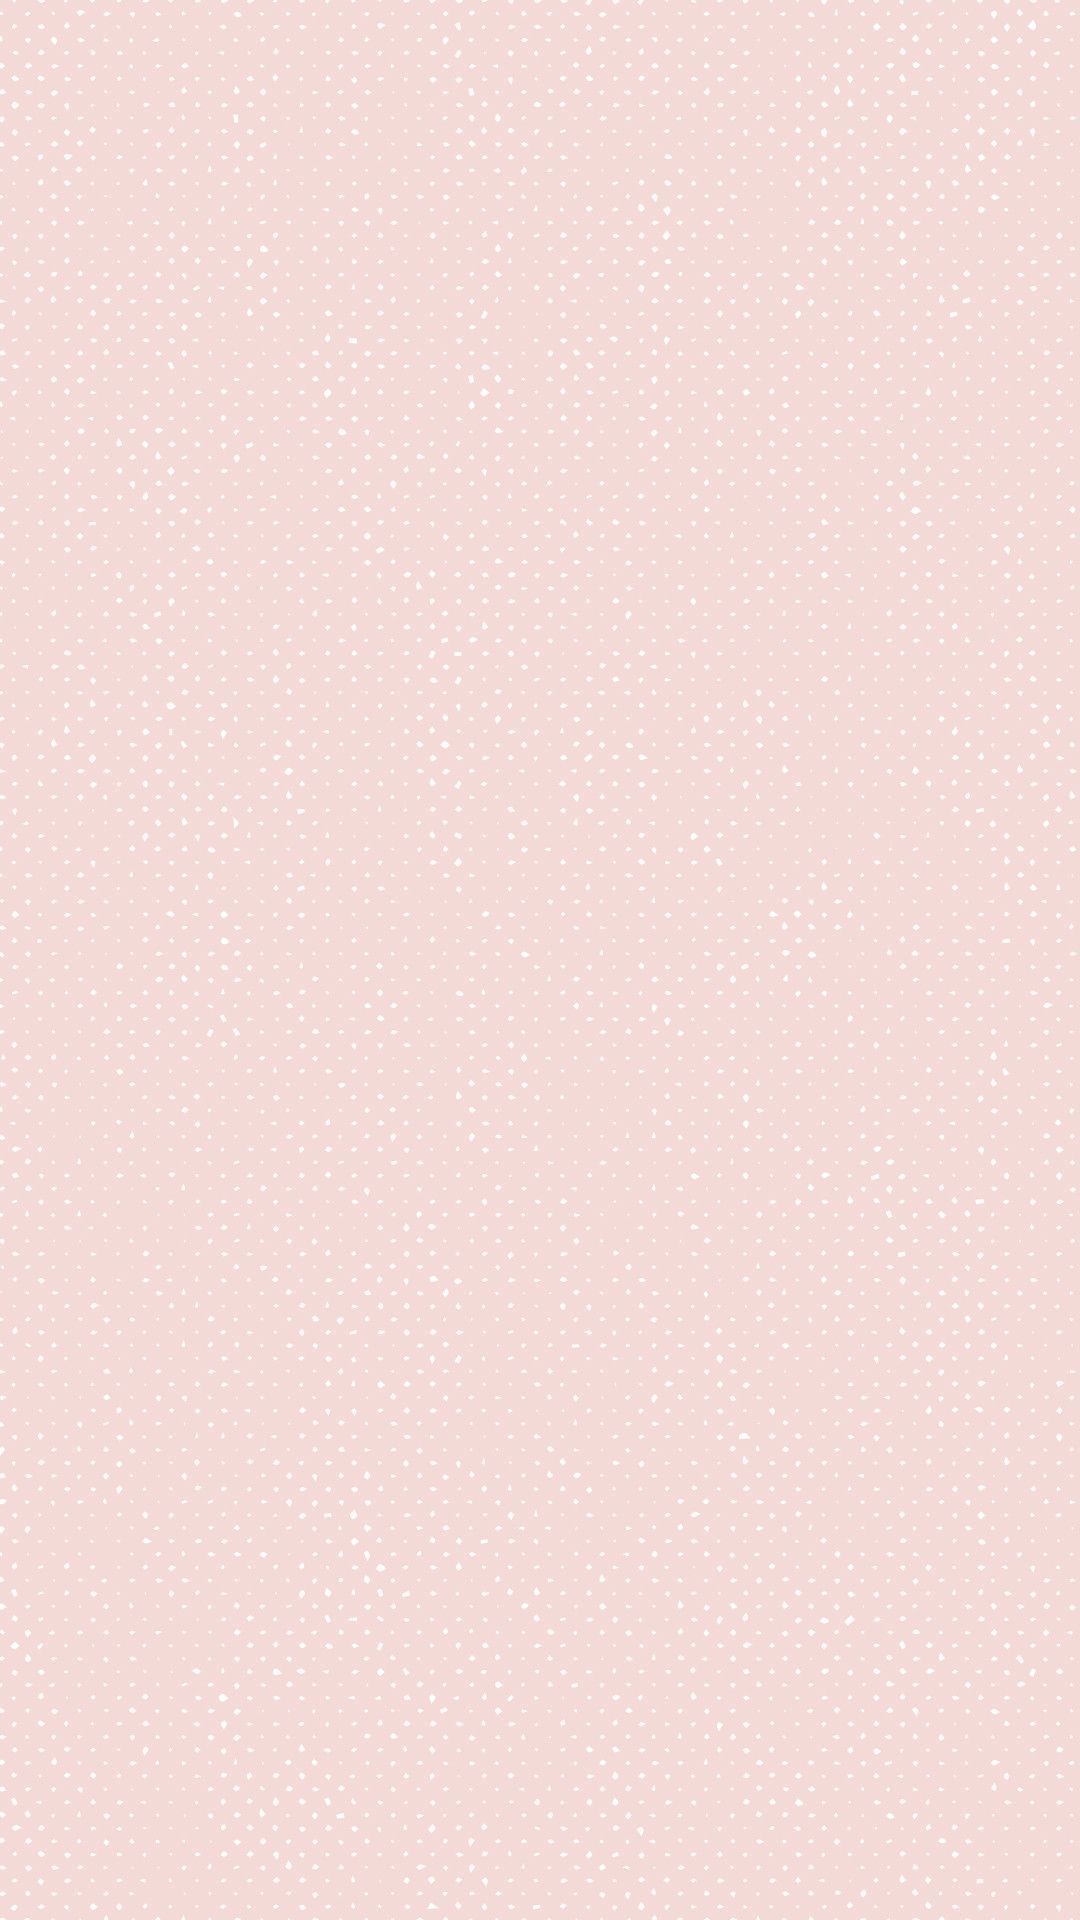 Pastel pink iphone wallpapers